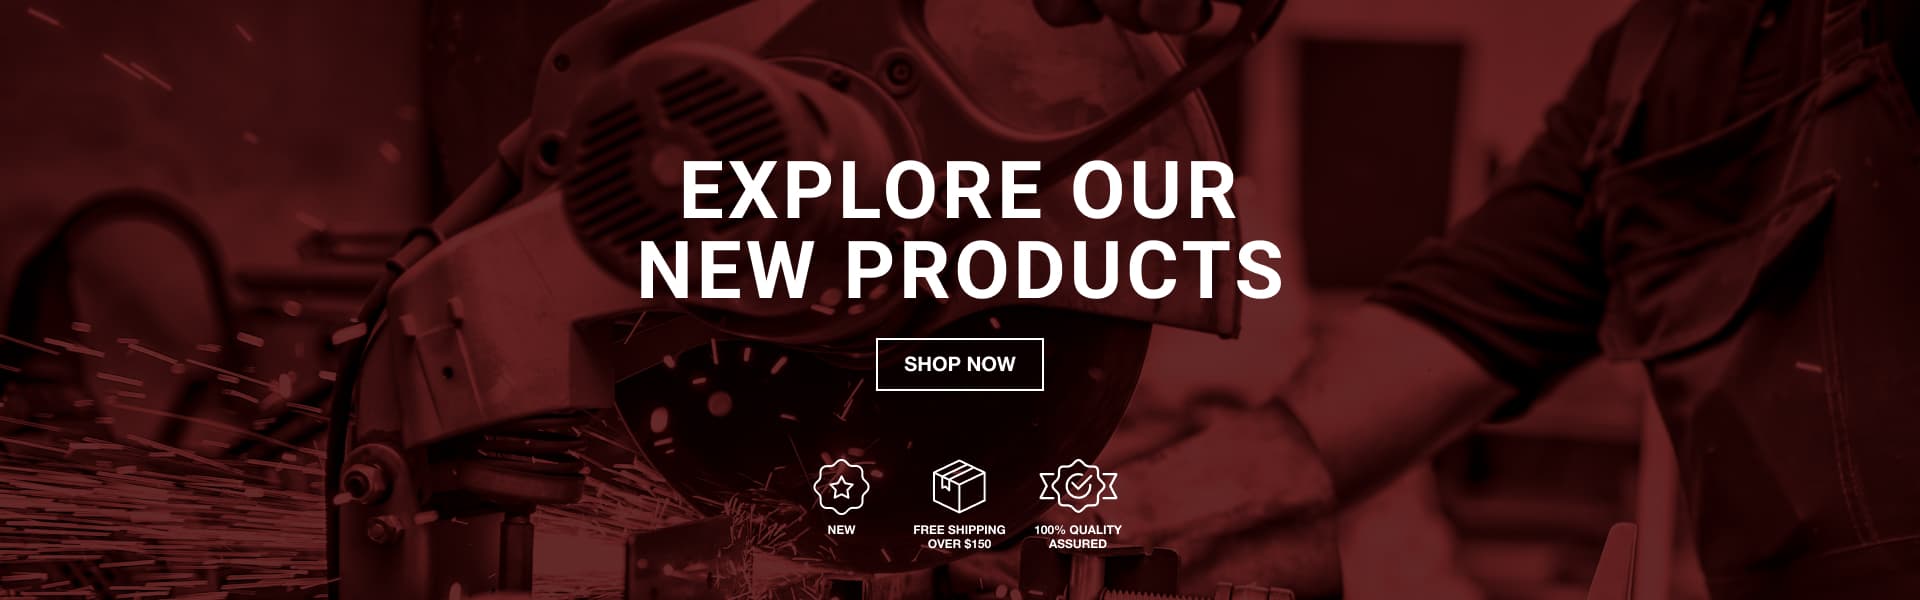 Explore Our New Products